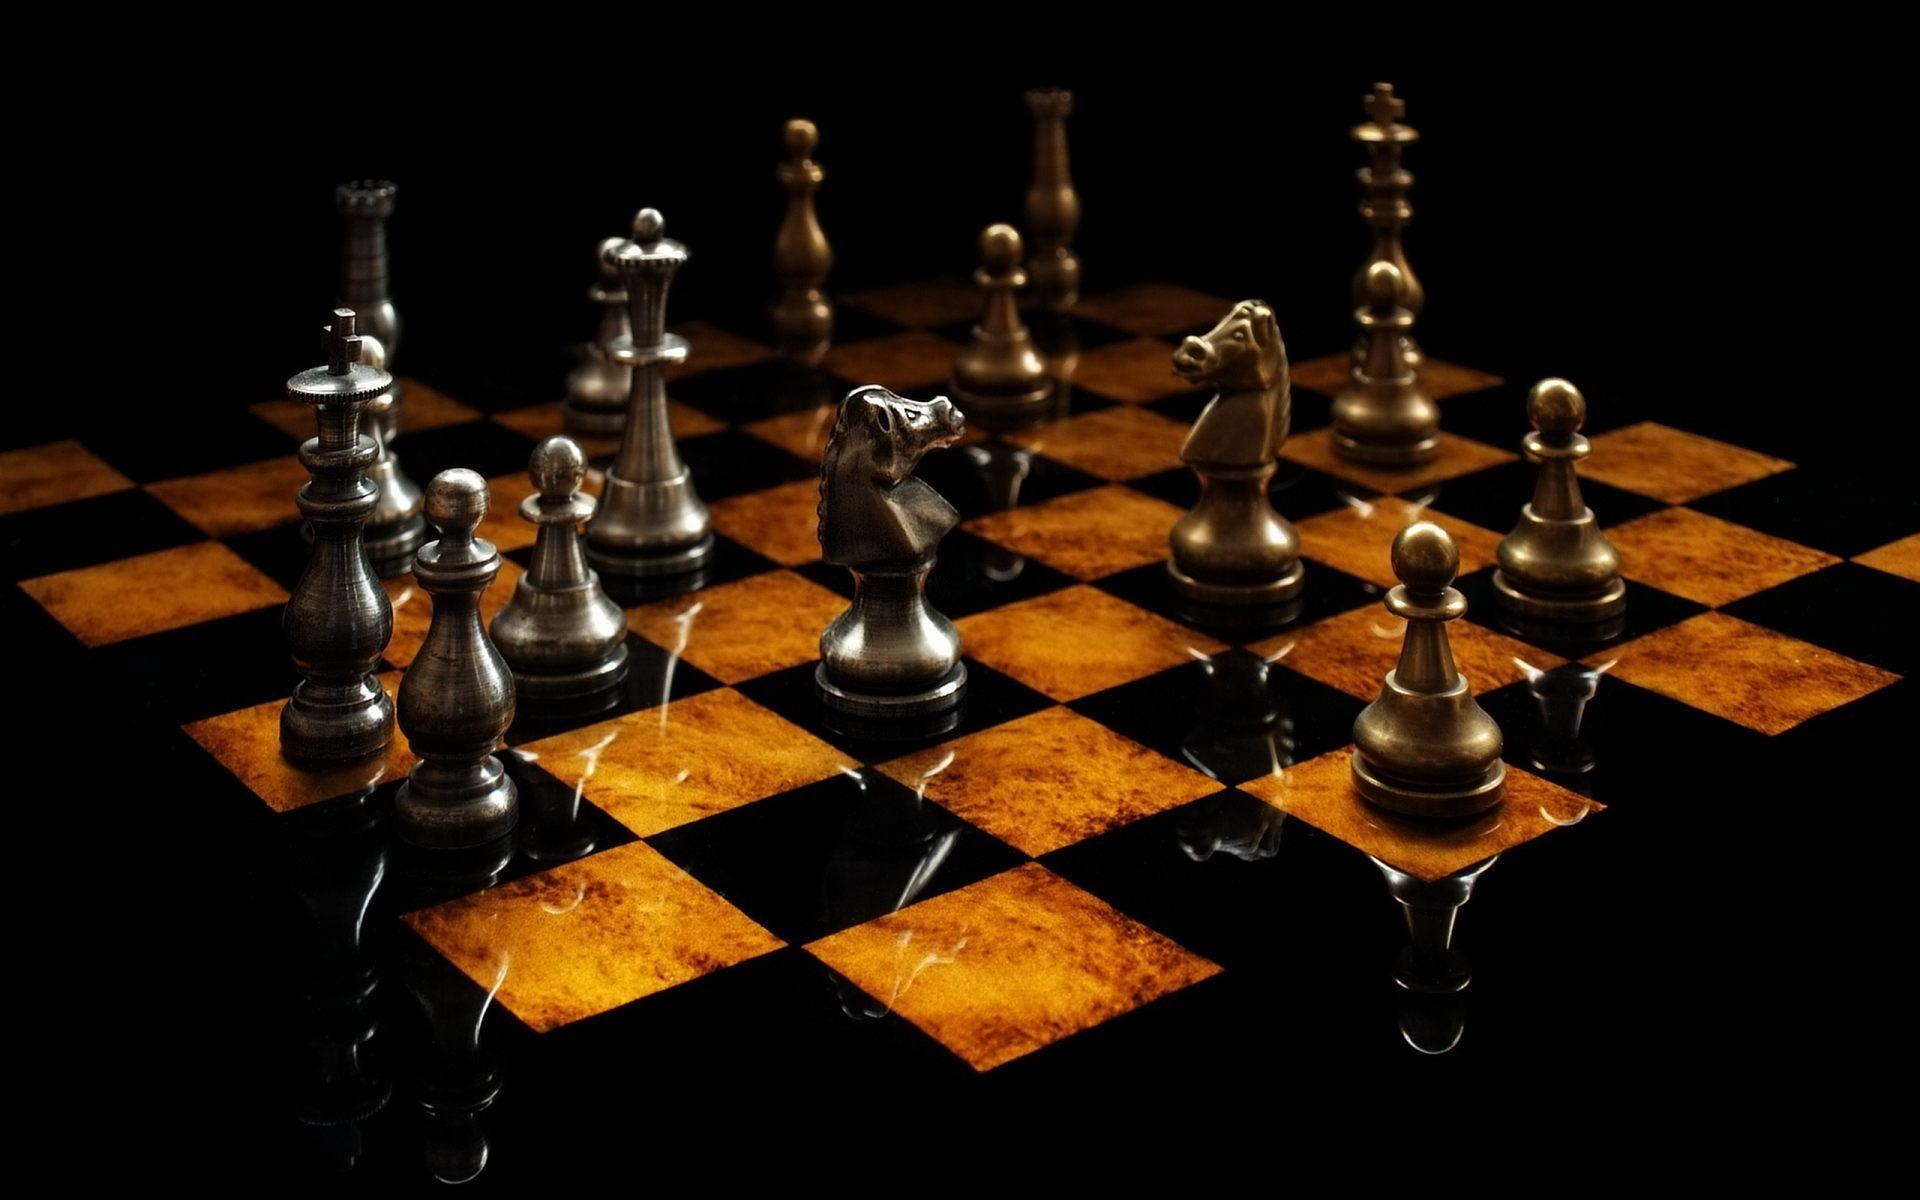 3D Chess Game Picture HD Wallpaper For Your PC Desktop. chess